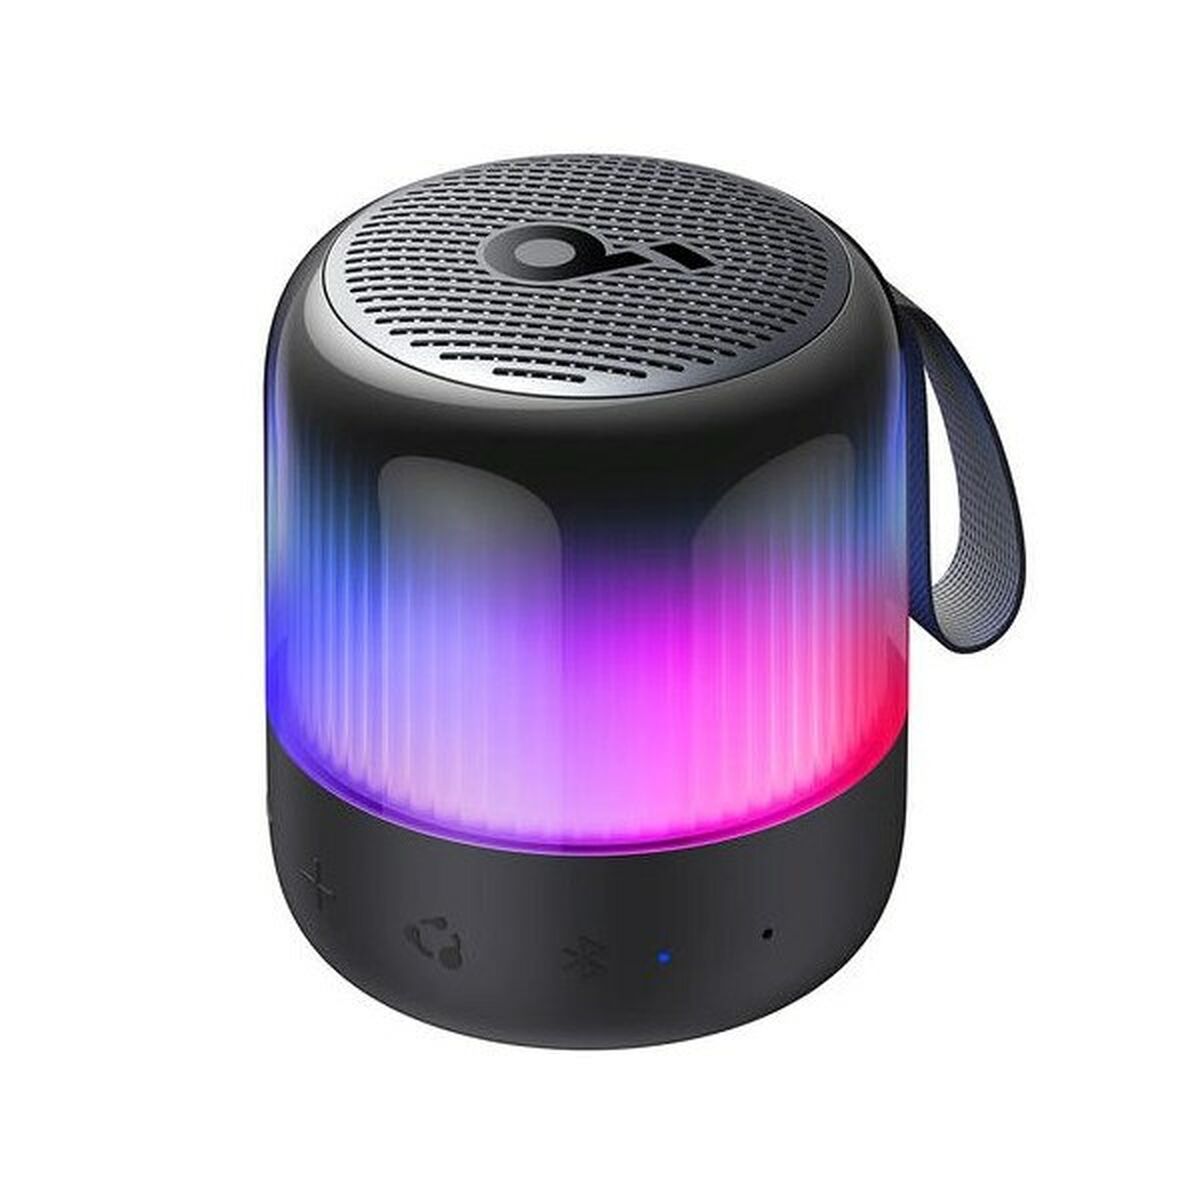 Bluetooth Speakers Soundcore Glow Mini Black, Soundcore, Electronics, Mobile communication and accessories, bluetooth-speakers-soundcore-glow-mini-black, Brand_Soundcore, category-reference-2609, category-reference-2882, category-reference-2923, category-reference-t-19653, category-reference-t-21311, category-reference-t-25527, category-reference-t-4036, category-reference-t-4037, Condition_NEW, entertainment, music, Price_50 - 100, telephones & tablets, wifi y bluetooth, RiotNook